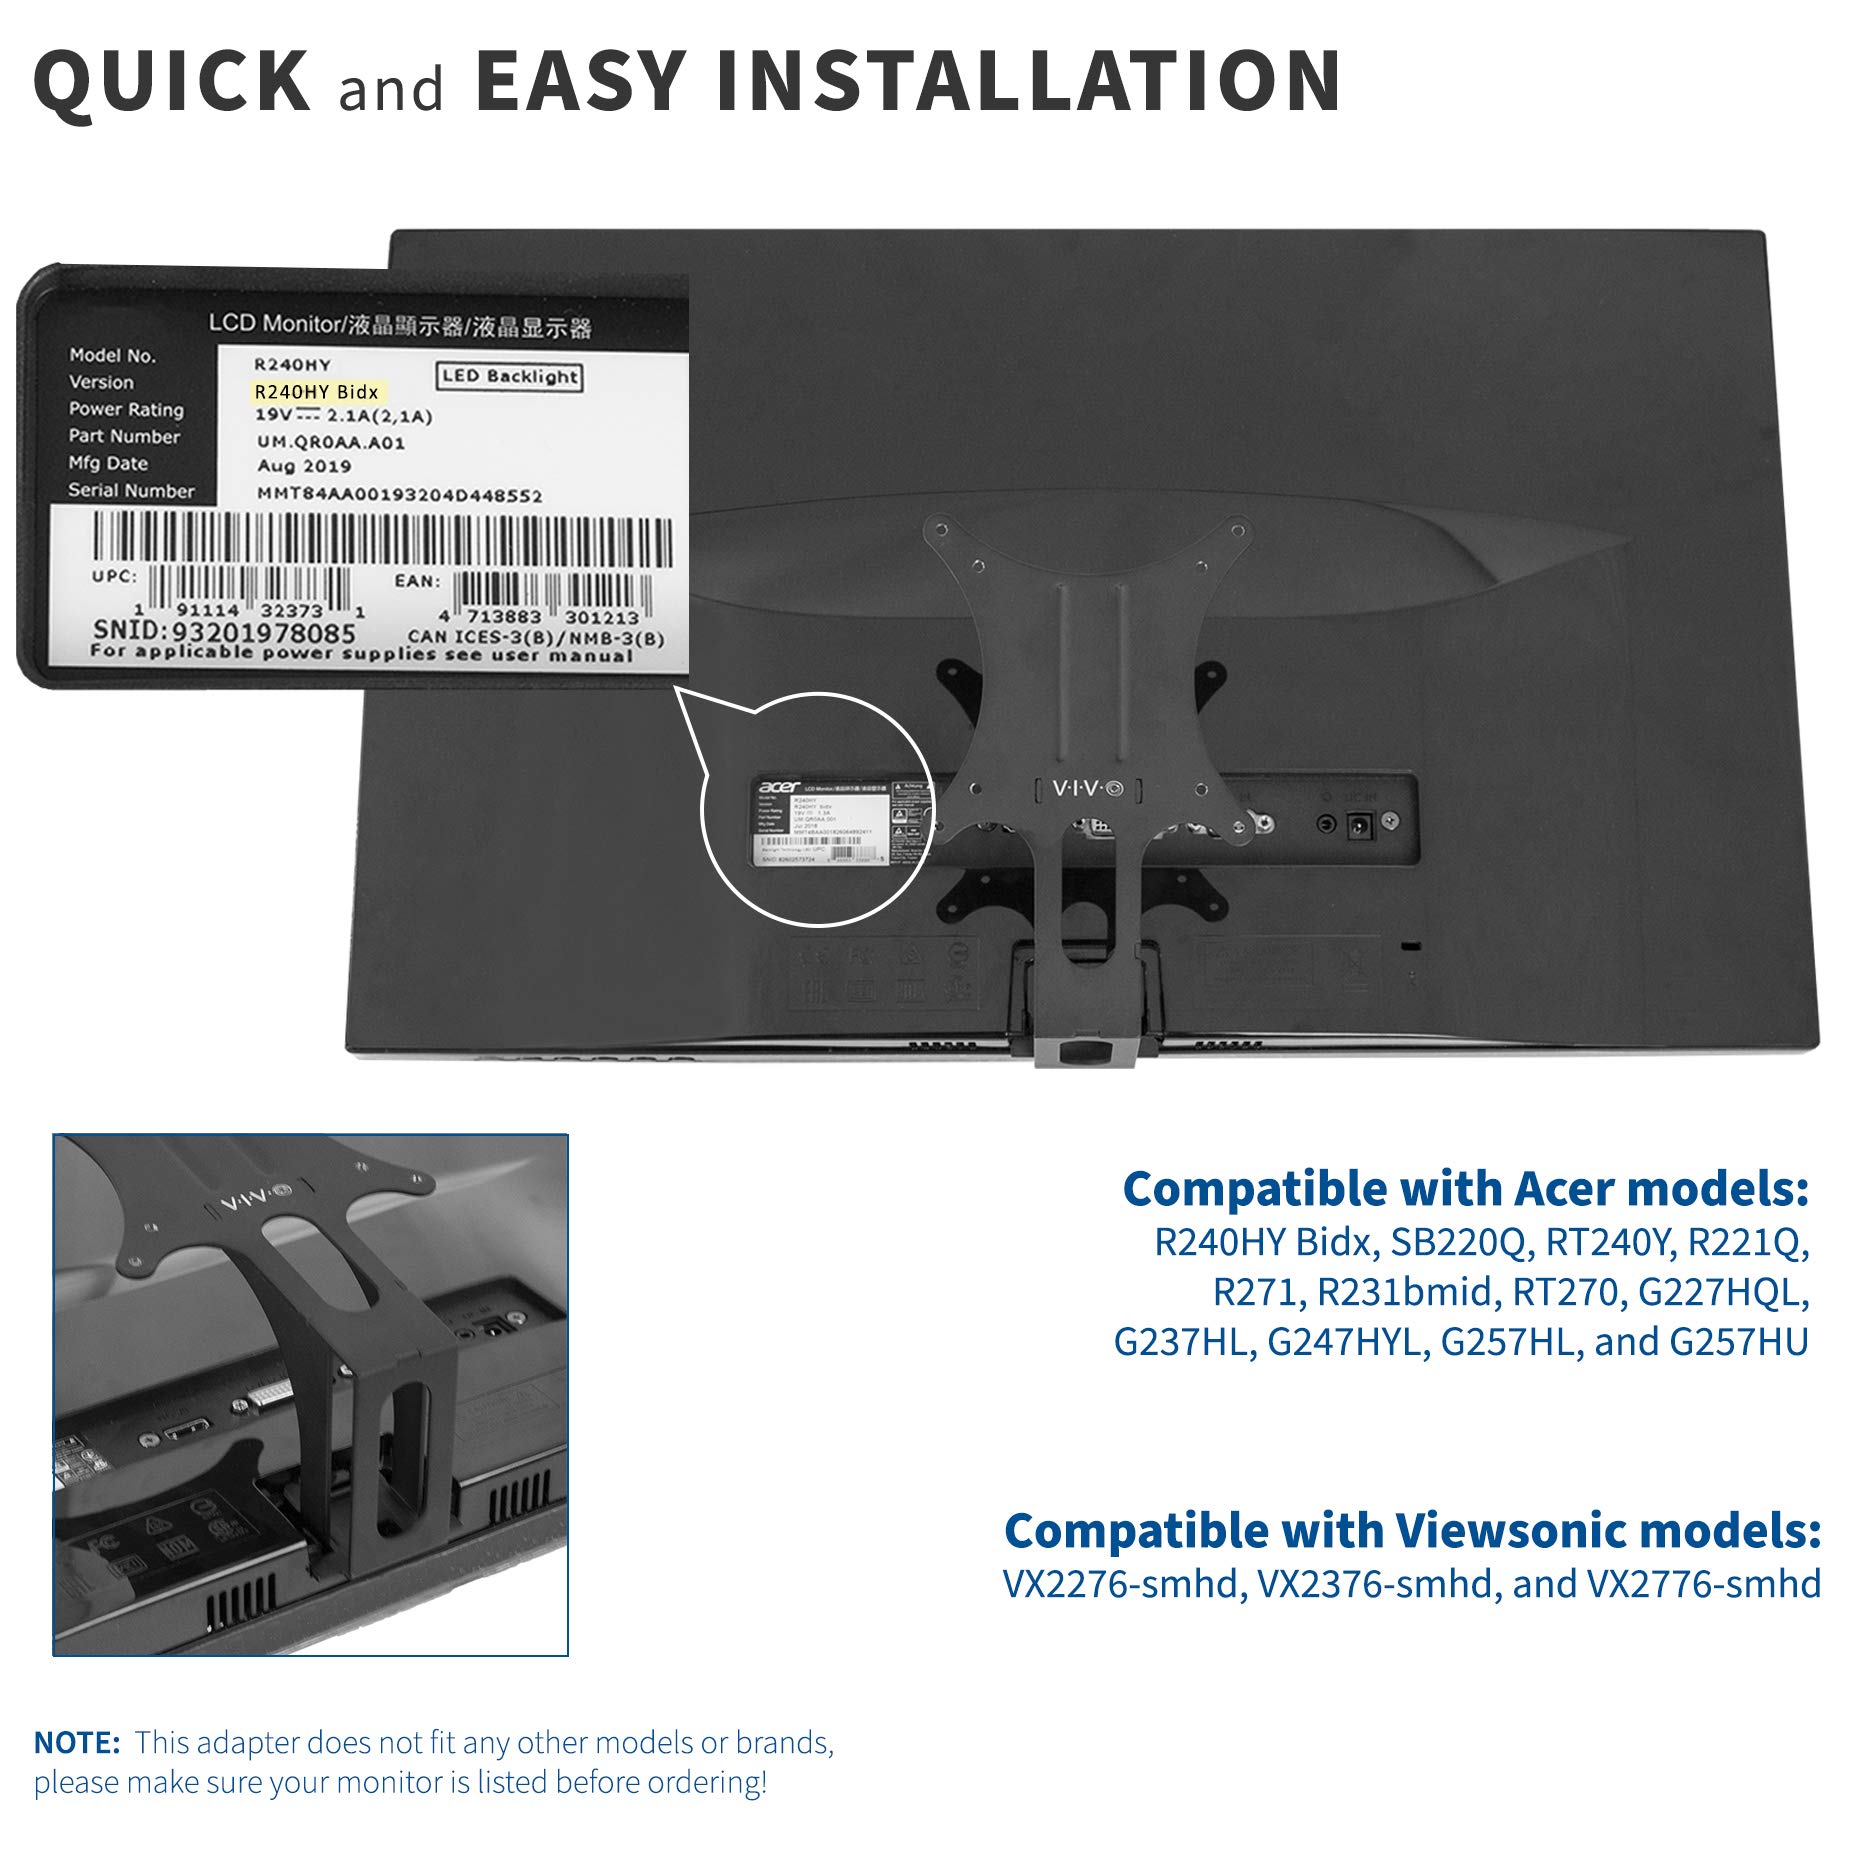 VIVO Quick Attach VESA Adapter Plate, Designed for Acer and Viewsonic Monitors Including R240HY bidx, SB220Q, RT240Y, R221Q, RT270, G227HQL, VX2276-smhd, and More, VESA up to 100x100, MOUNT-AR240H